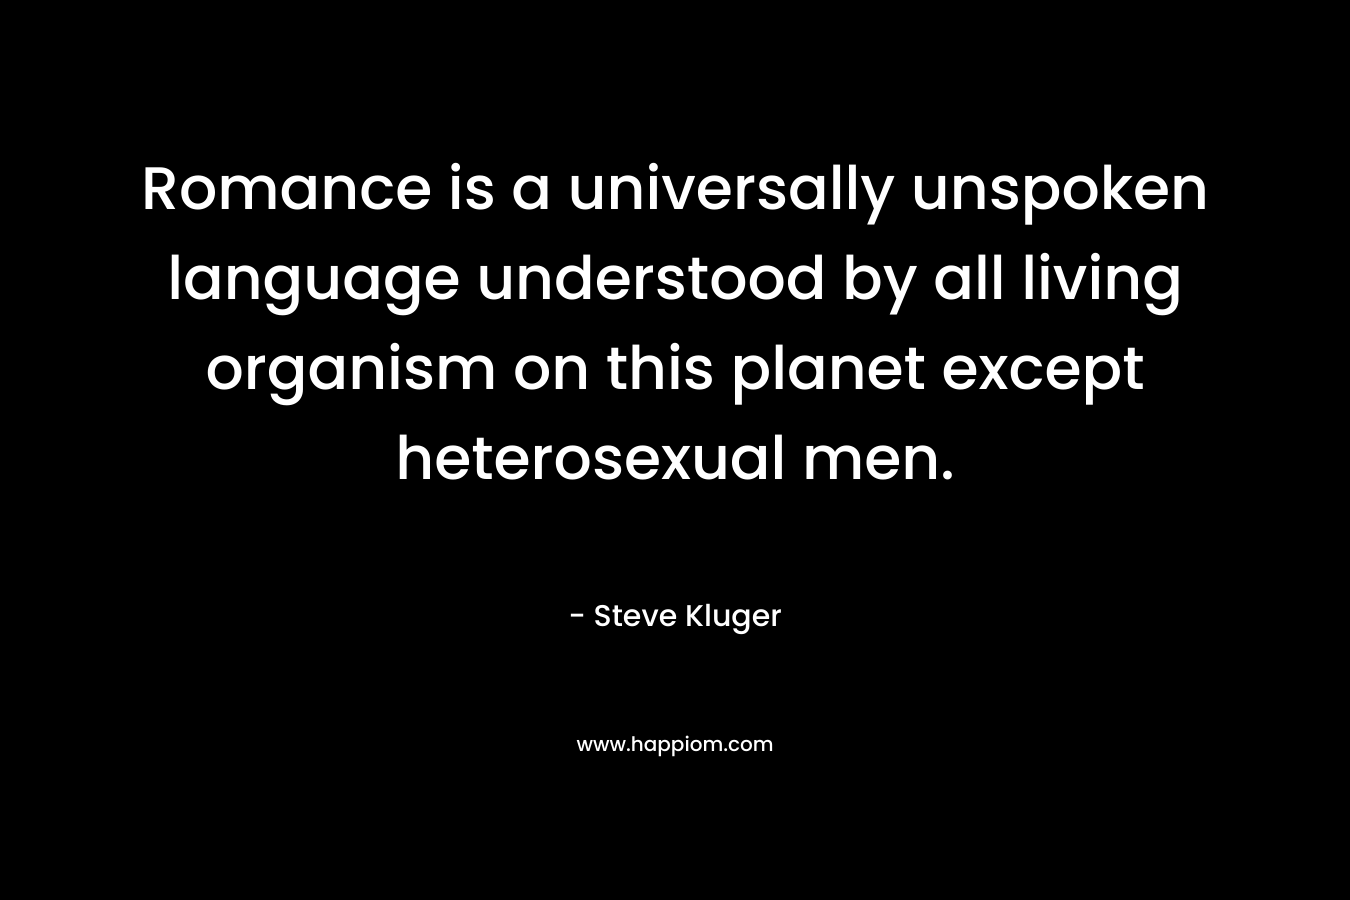 Romance is a universally unspoken language understood by all living organism on this planet except heterosexual men. – Steve Kluger